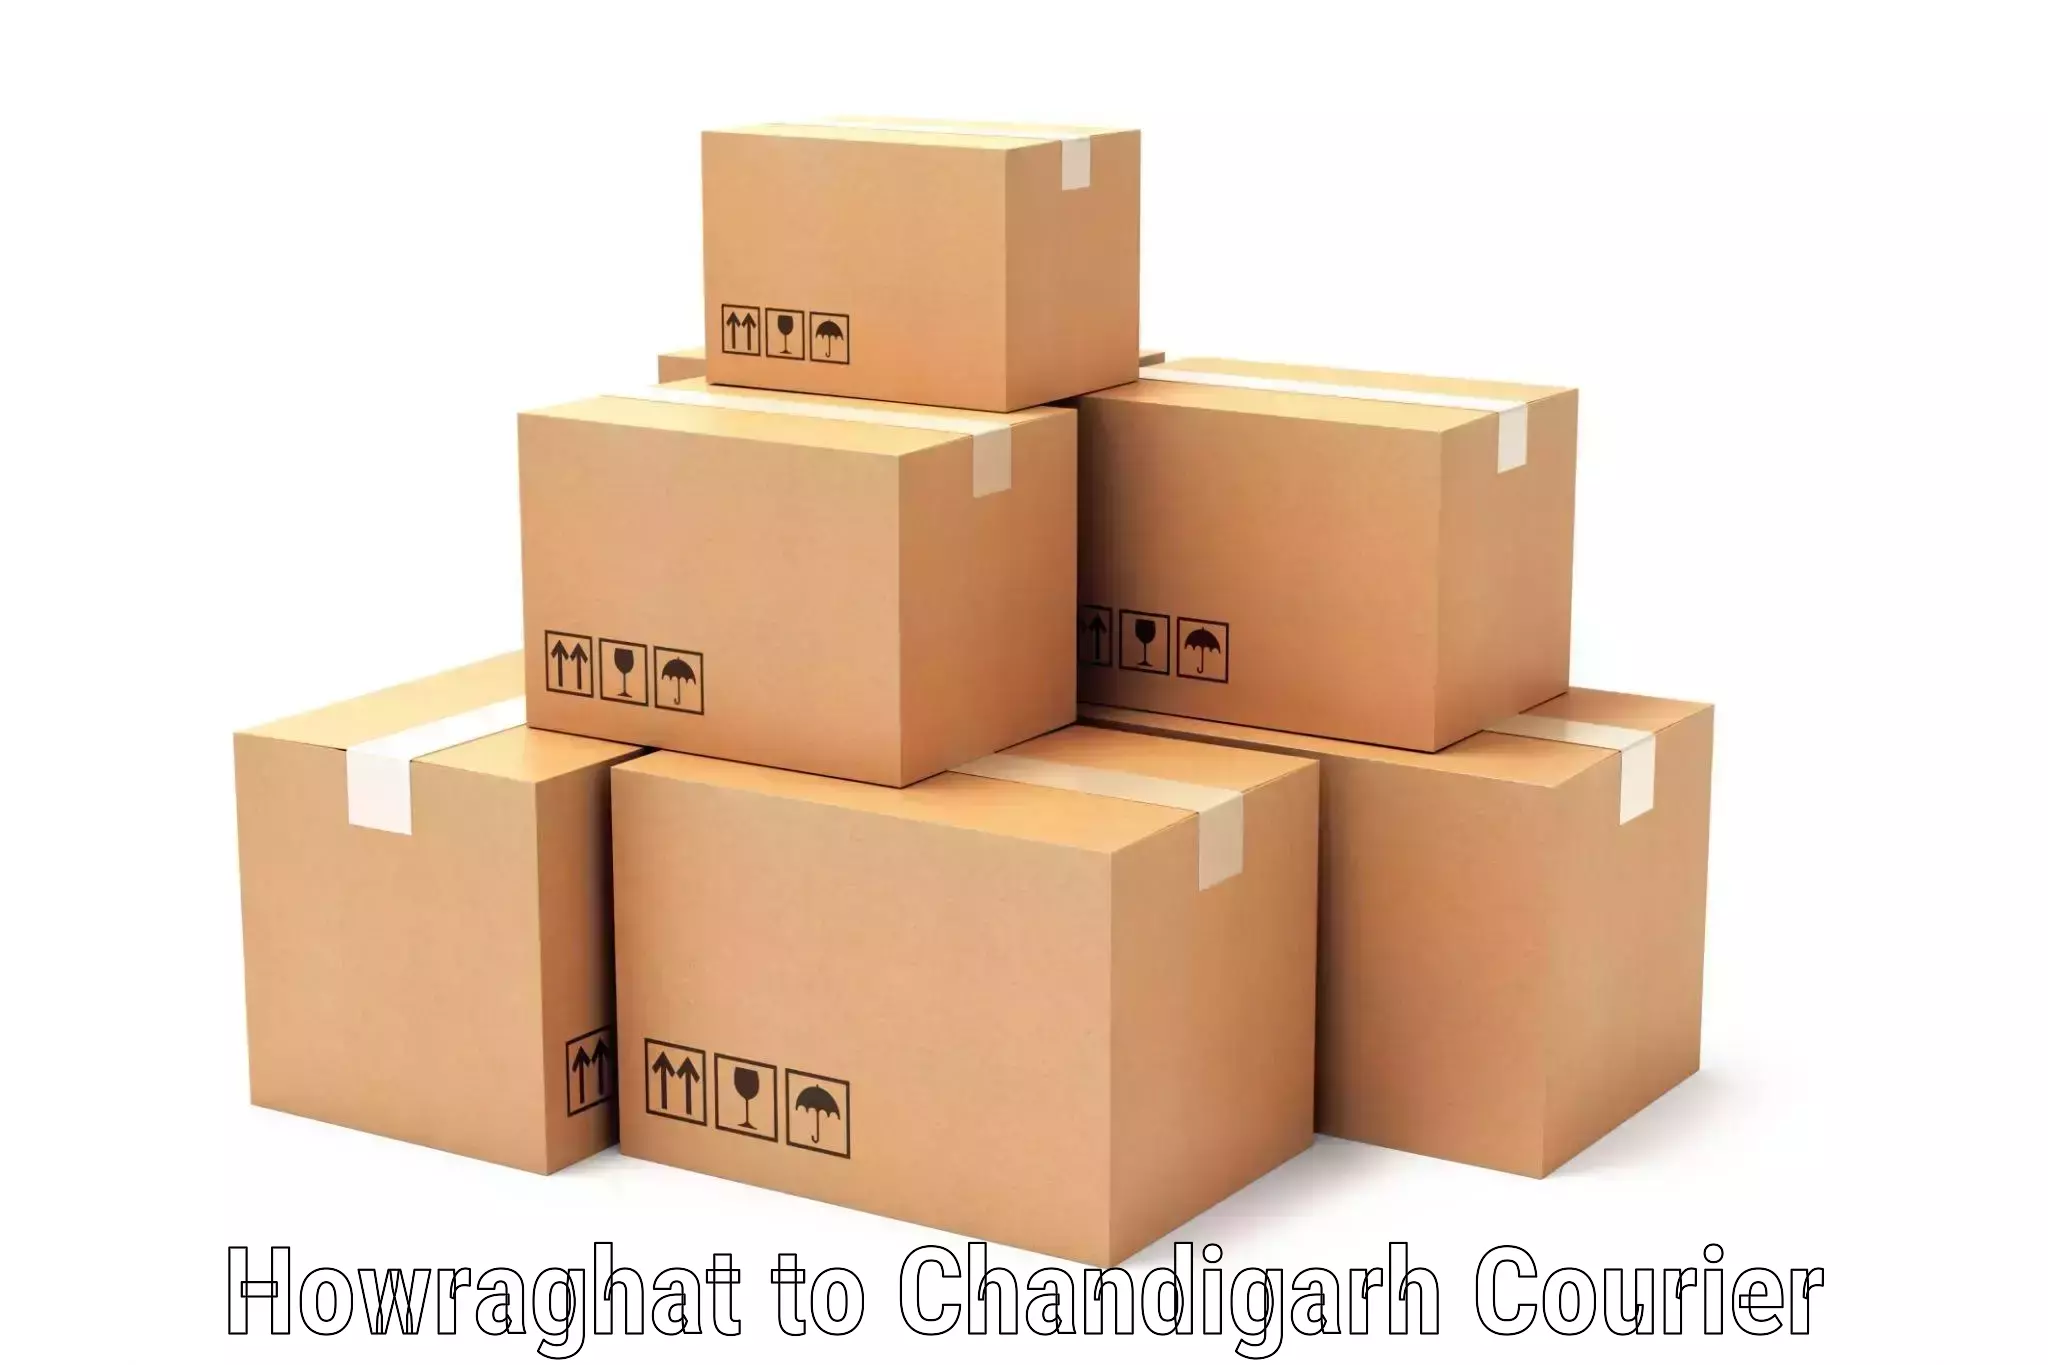 High-capacity courier solutions Howraghat to Kharar